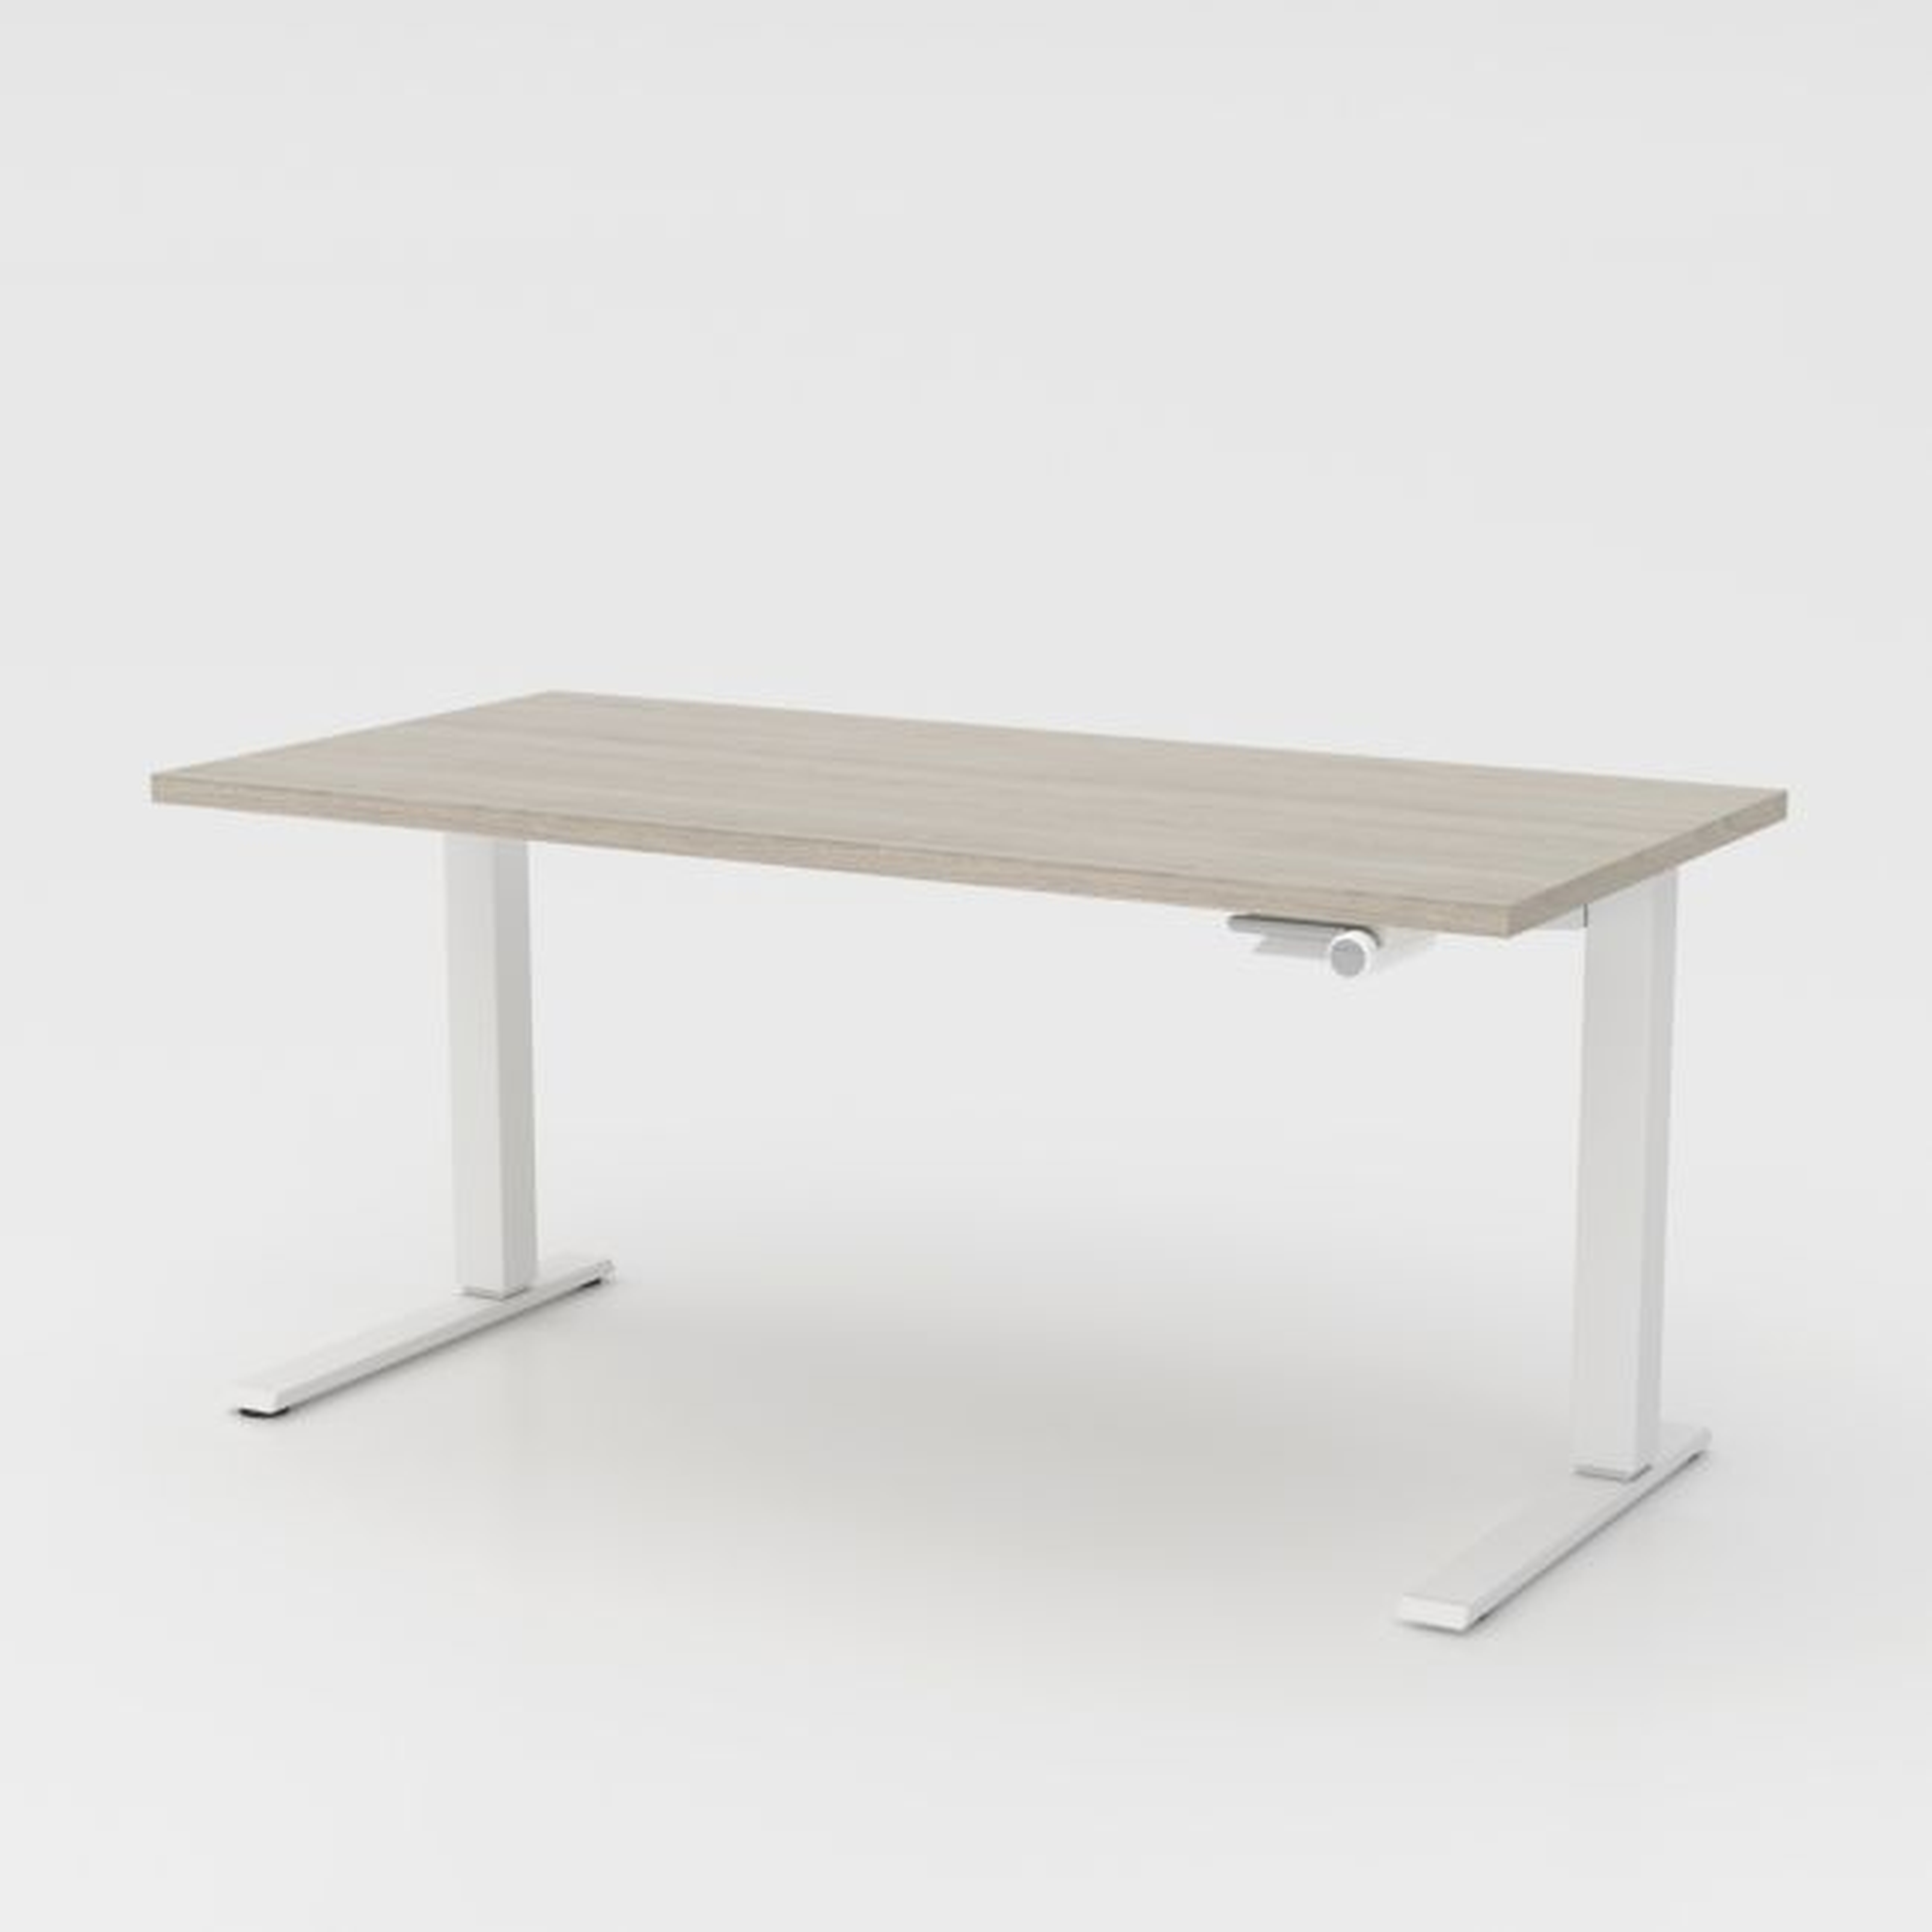 Humanscale ® Float ® Sit/Stand 60" Ash Grey Desk - Crate and Barrel